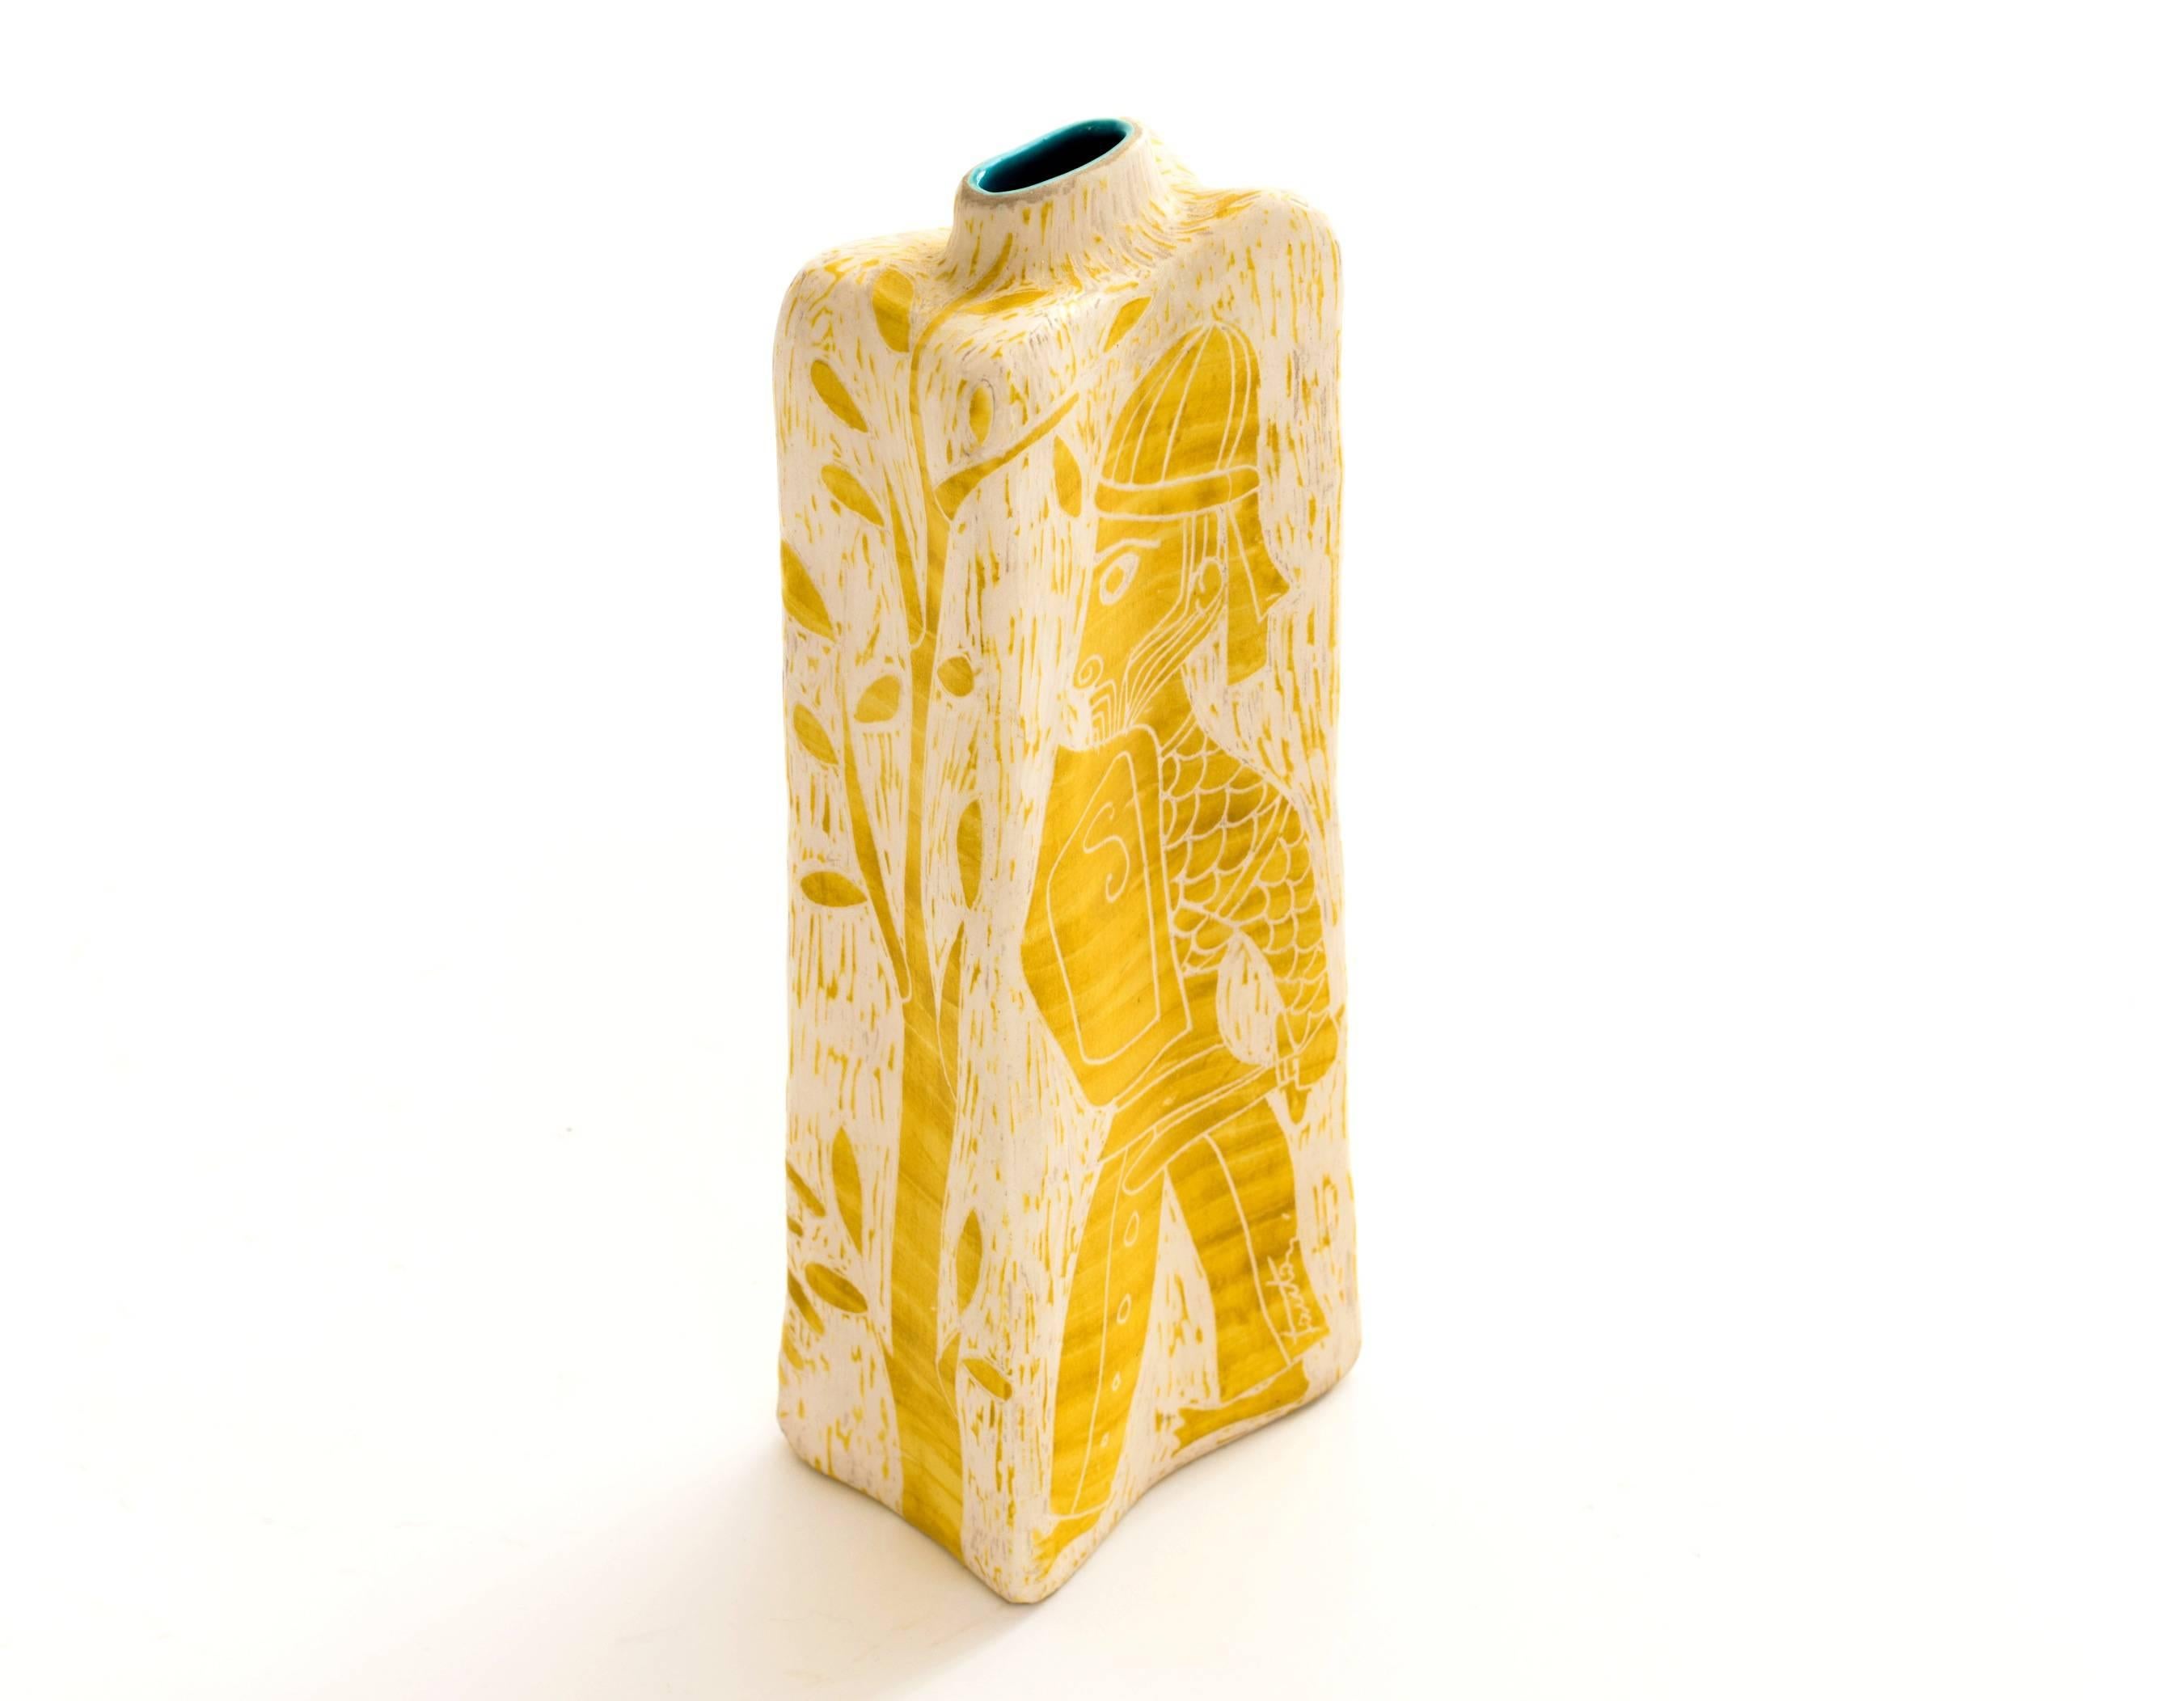 Rare and Superb Marcello Fantoni ceramic warrior vase in relief with canary yellow and off-white with a turquoise interior. On the reverse is a graphic tree as well as the sides of the vase. Signed Fantoni on the right leg and Fantoni, Italy on the